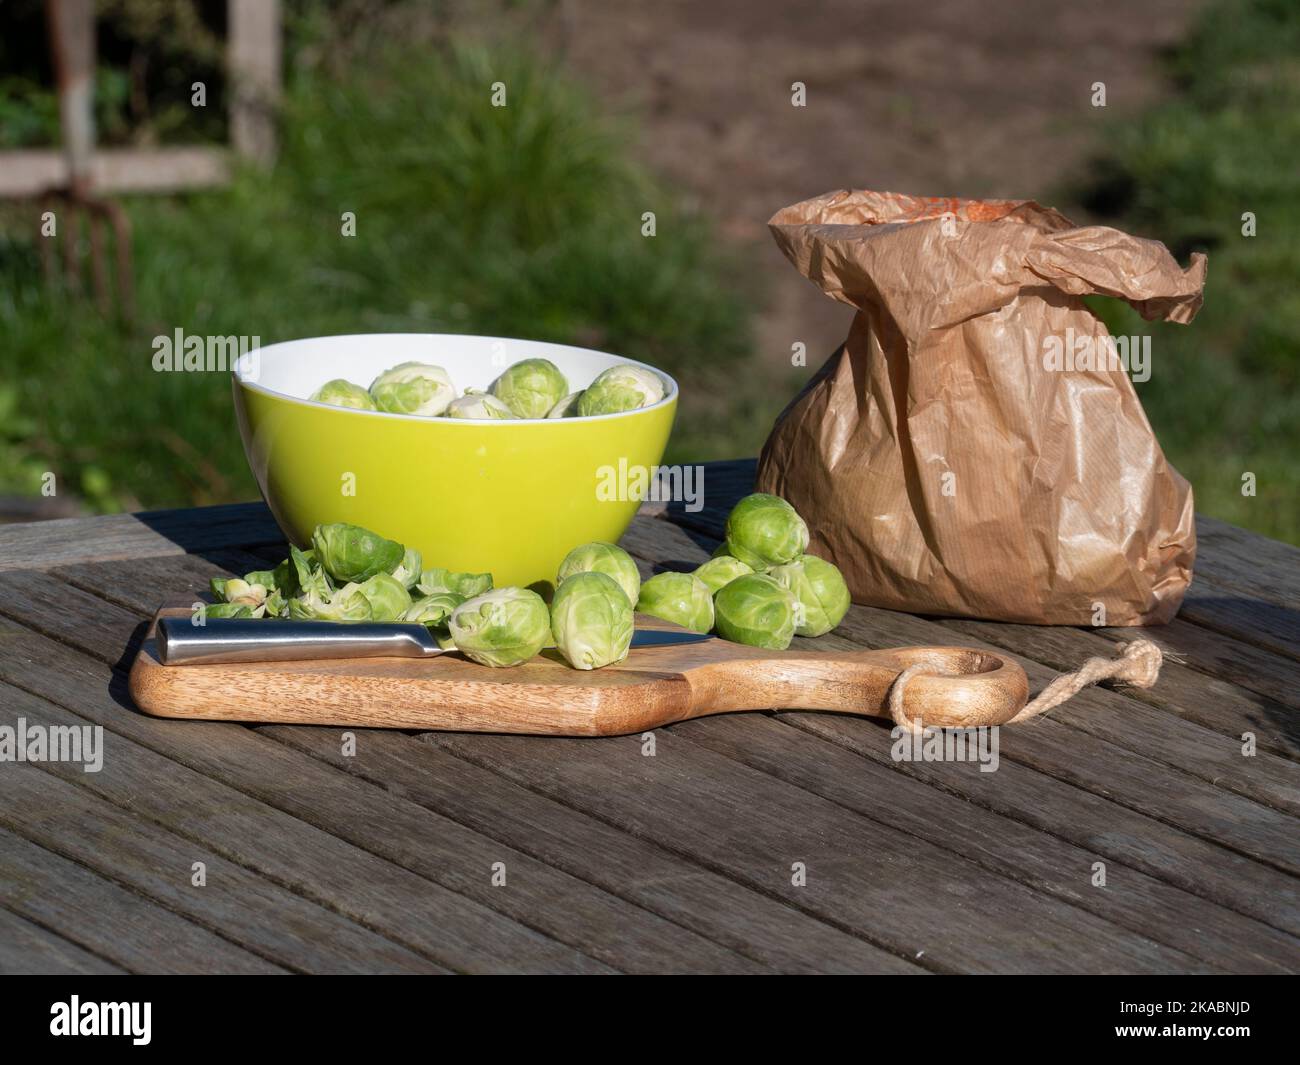 Brussels sprouts on a wooden board with a knife, leaf litter a green bowl and a brown paper bag Stock Photo